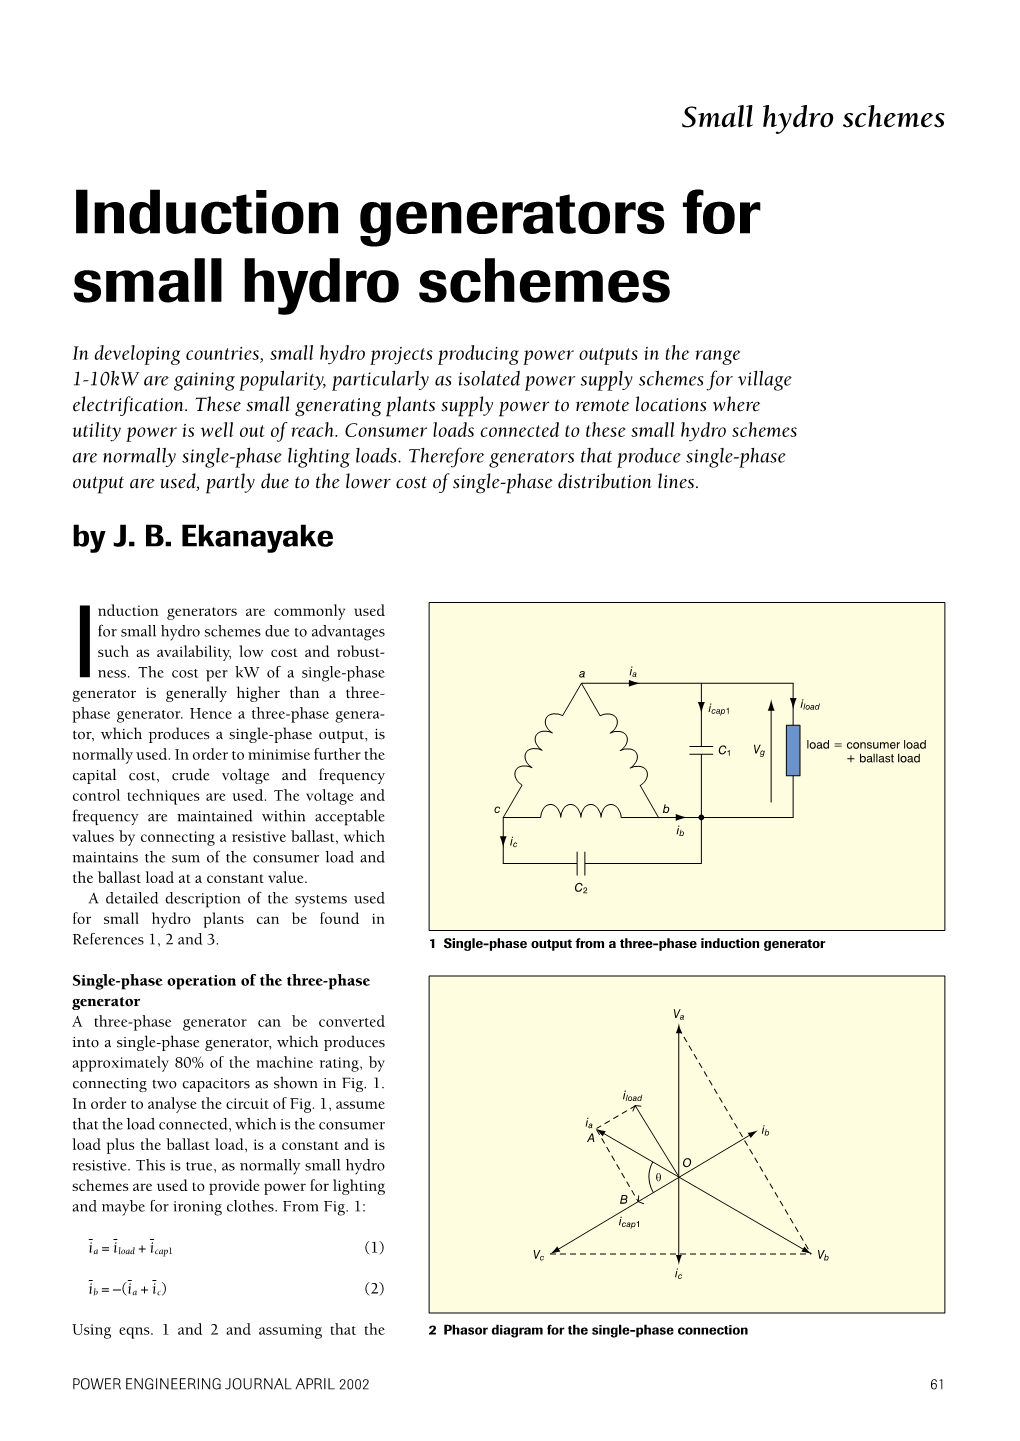 Induction Generators for Small Hydro Schemes